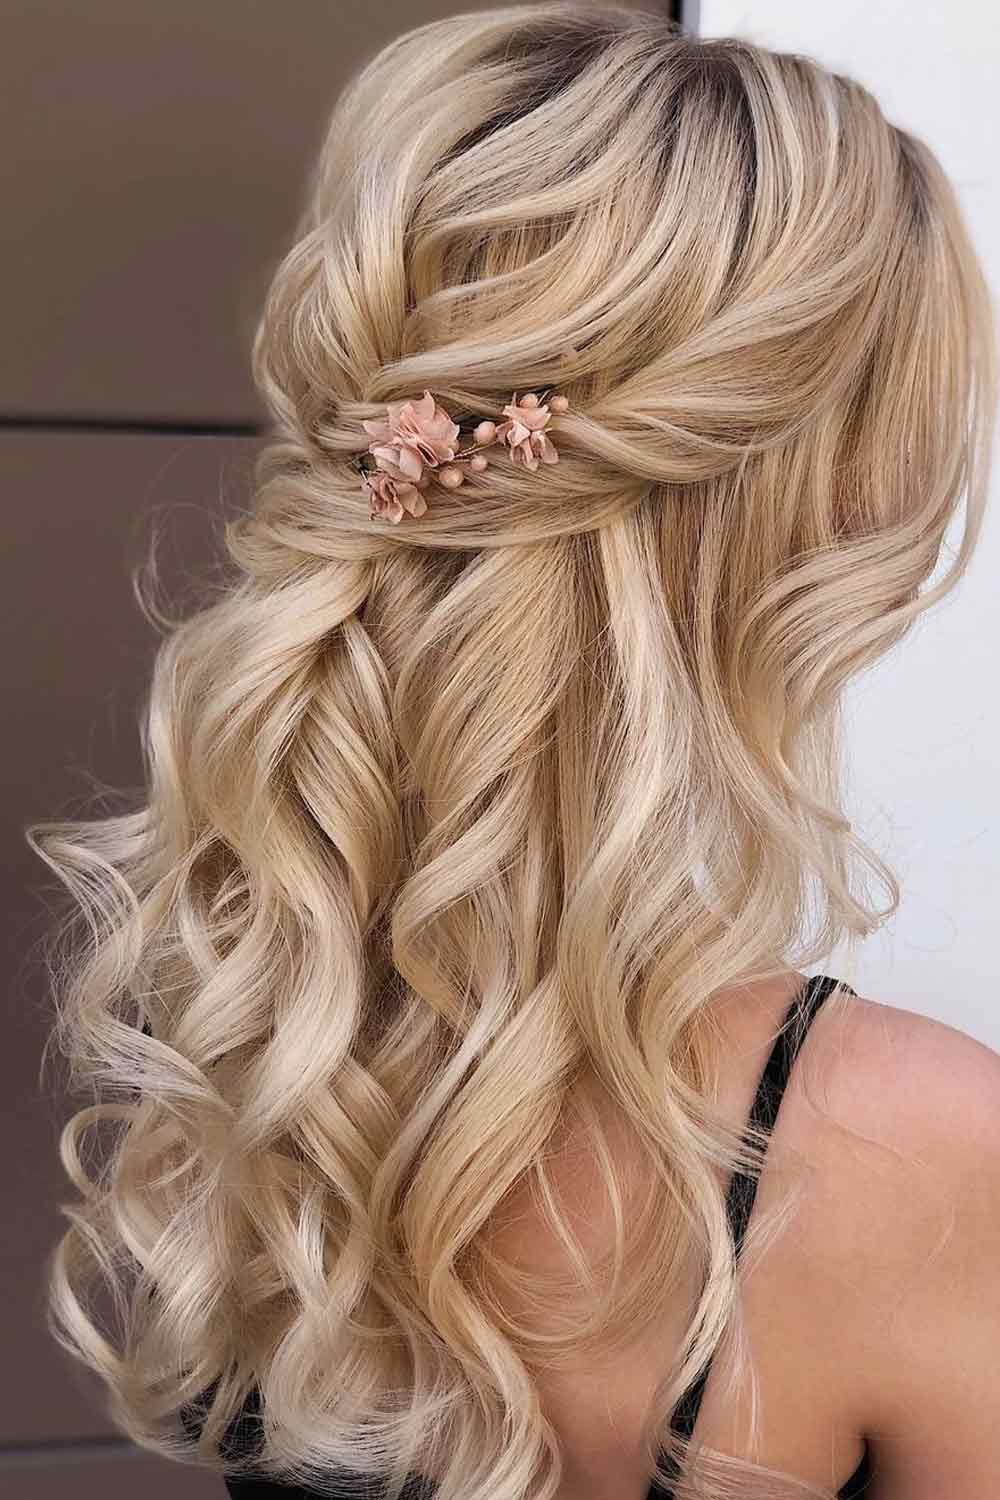 Wavy Half Up Half Down Hairstyle with Floral Accessory